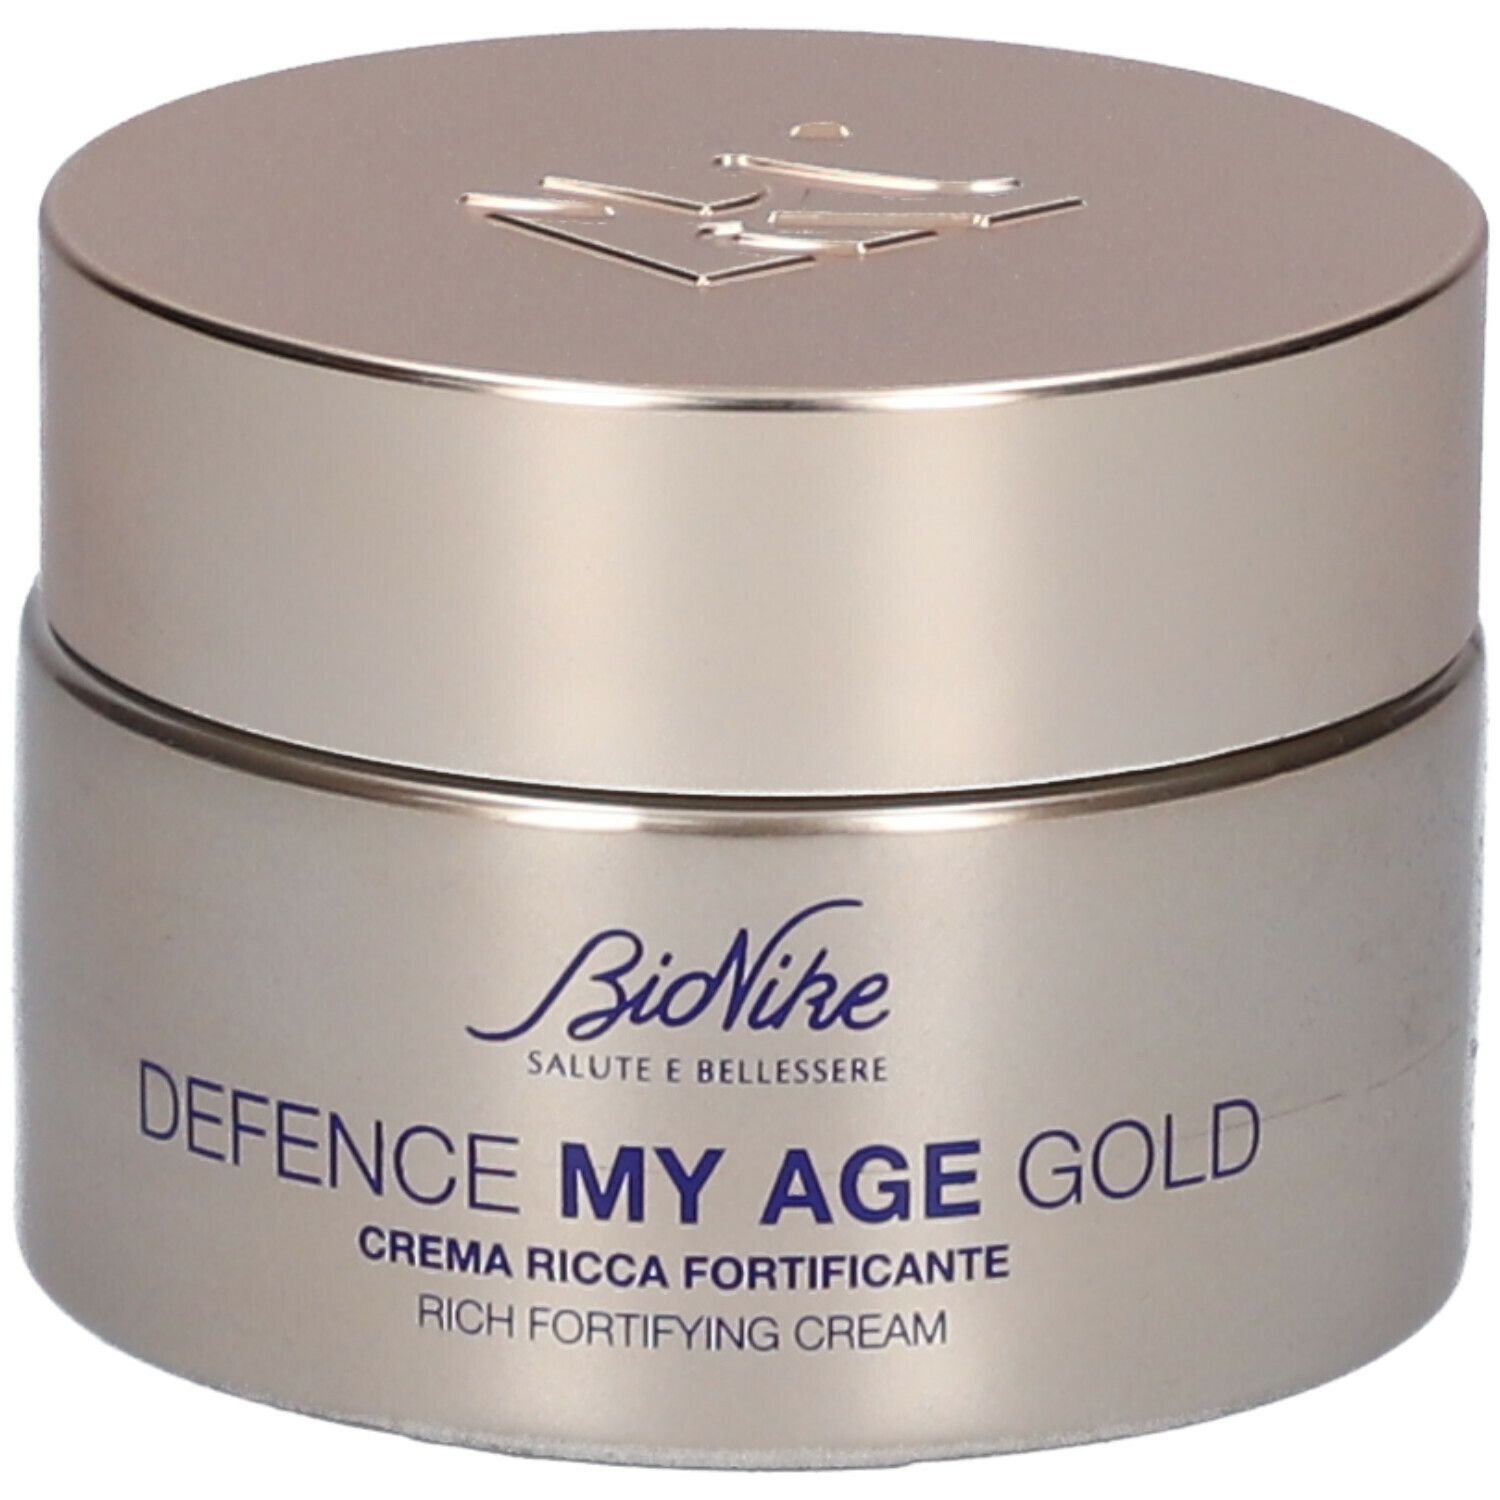 BioNike DEFENCE MY AGE GOLD Crema Ricca Fortificante